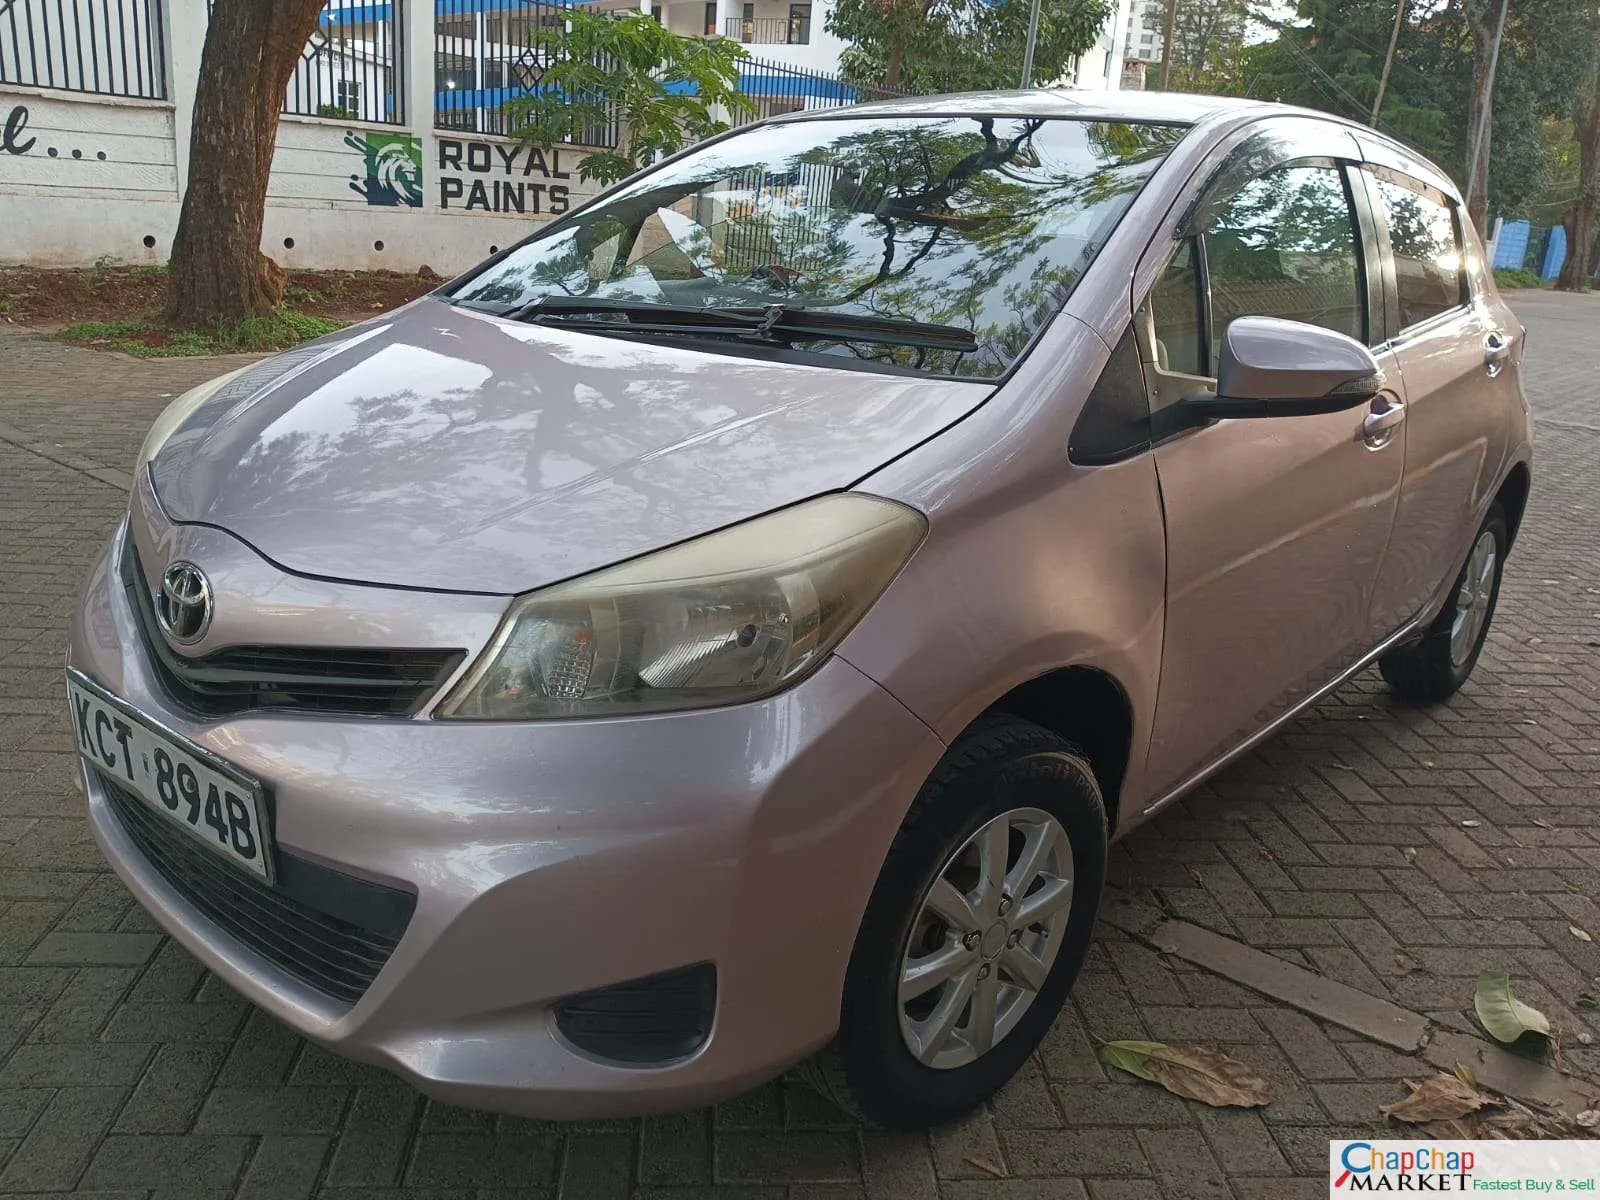 Cars Cars For Sale/Vehicles-Toyota Vitz 1300cc Pay 30% Deposit Trade in OK EXCLUSIVE 9